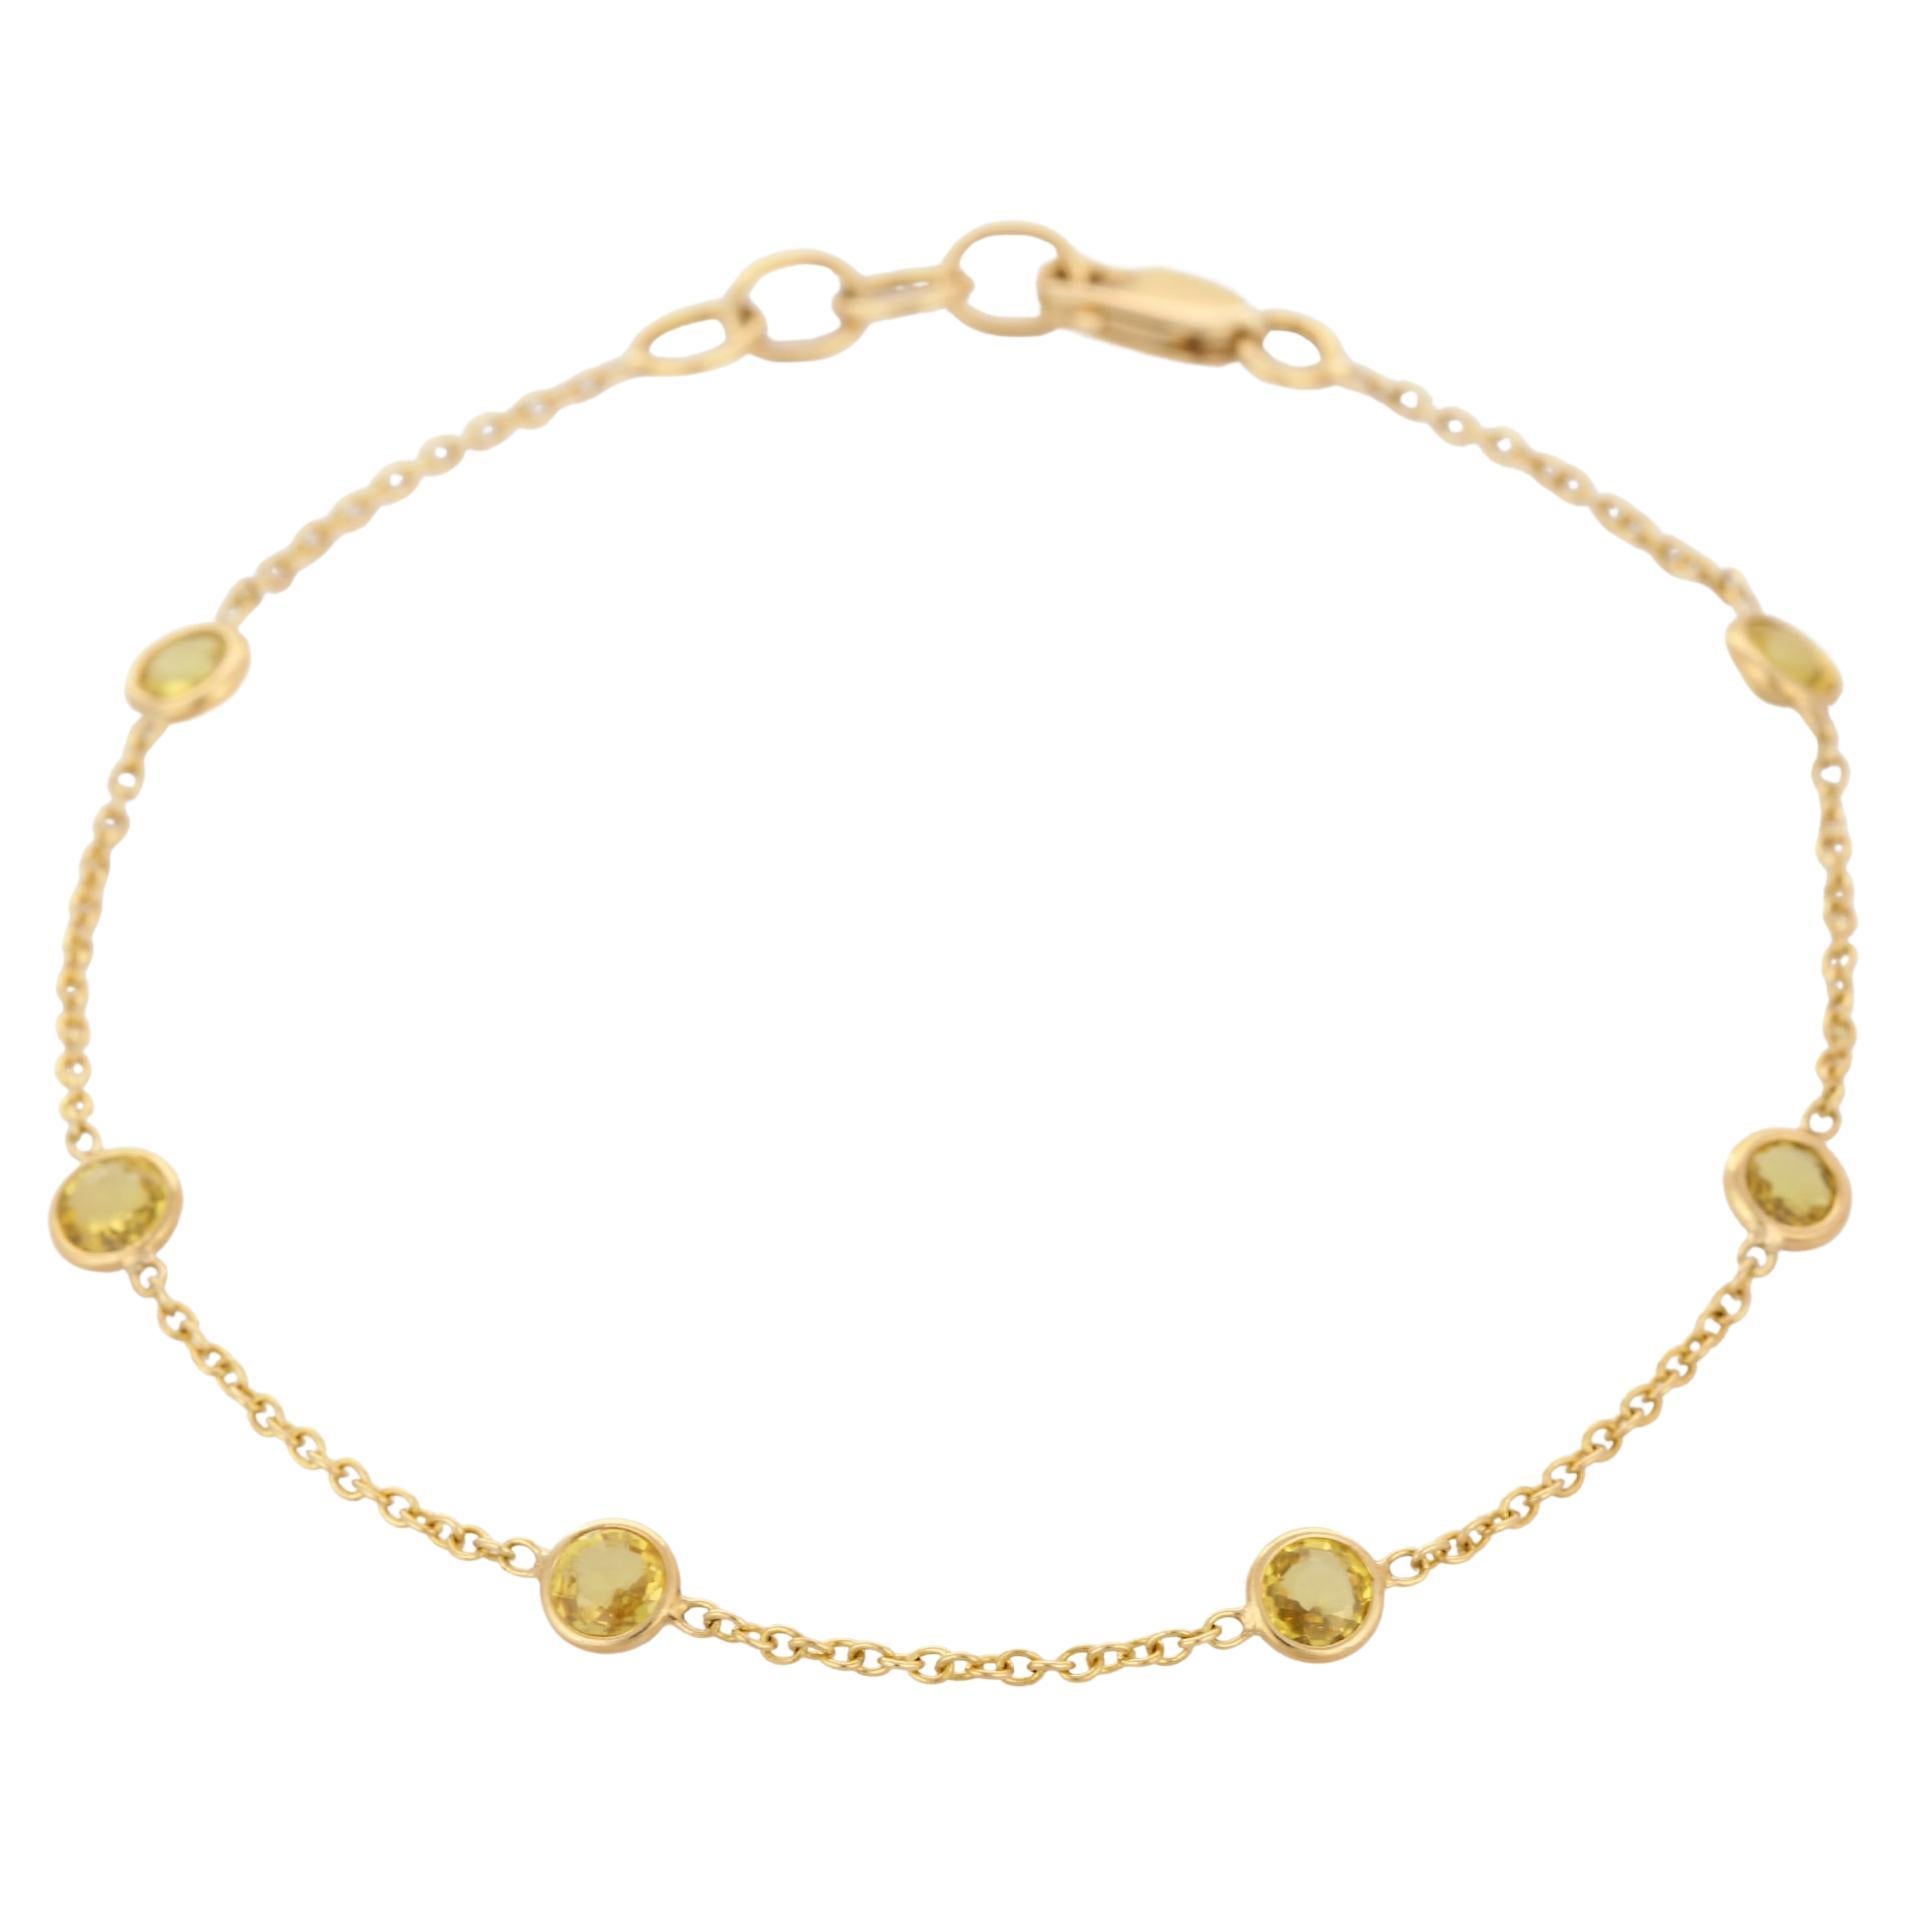 Minimalist Round Cut Yellow Sapphire Chain Bracelet Mounted in 18K Yellow Gold For Sale